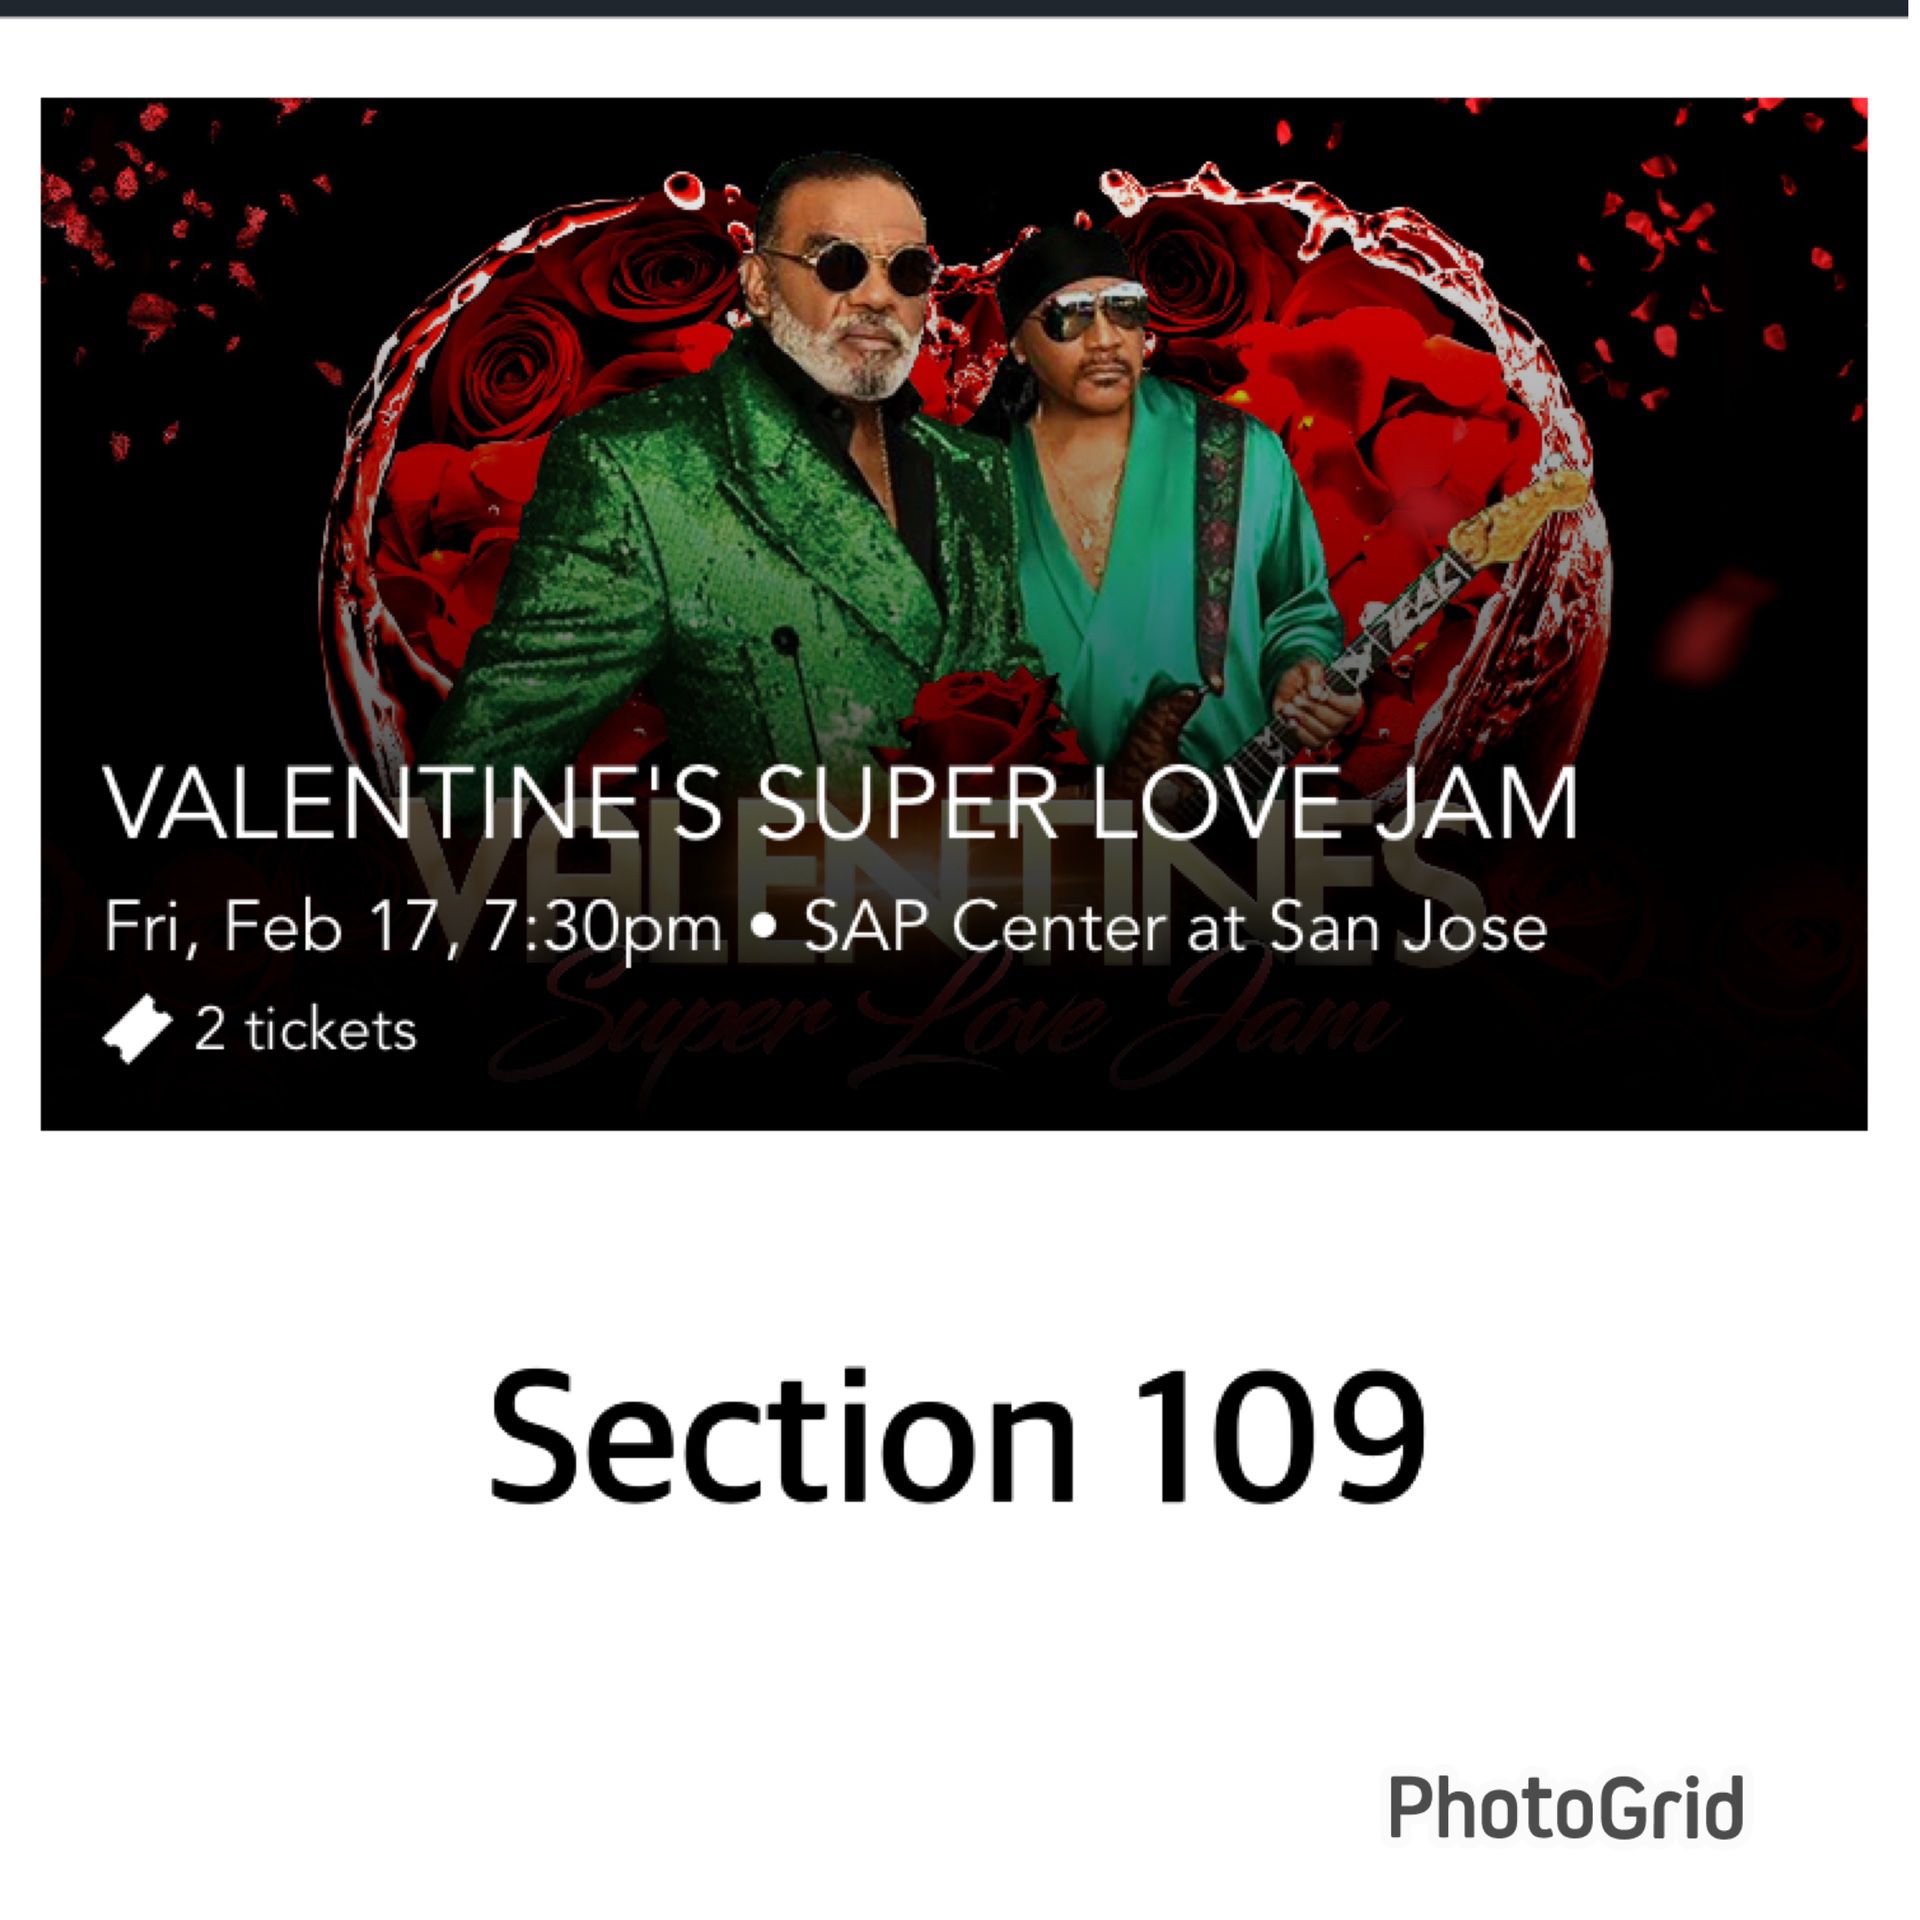 Concert Tickets February 17th 